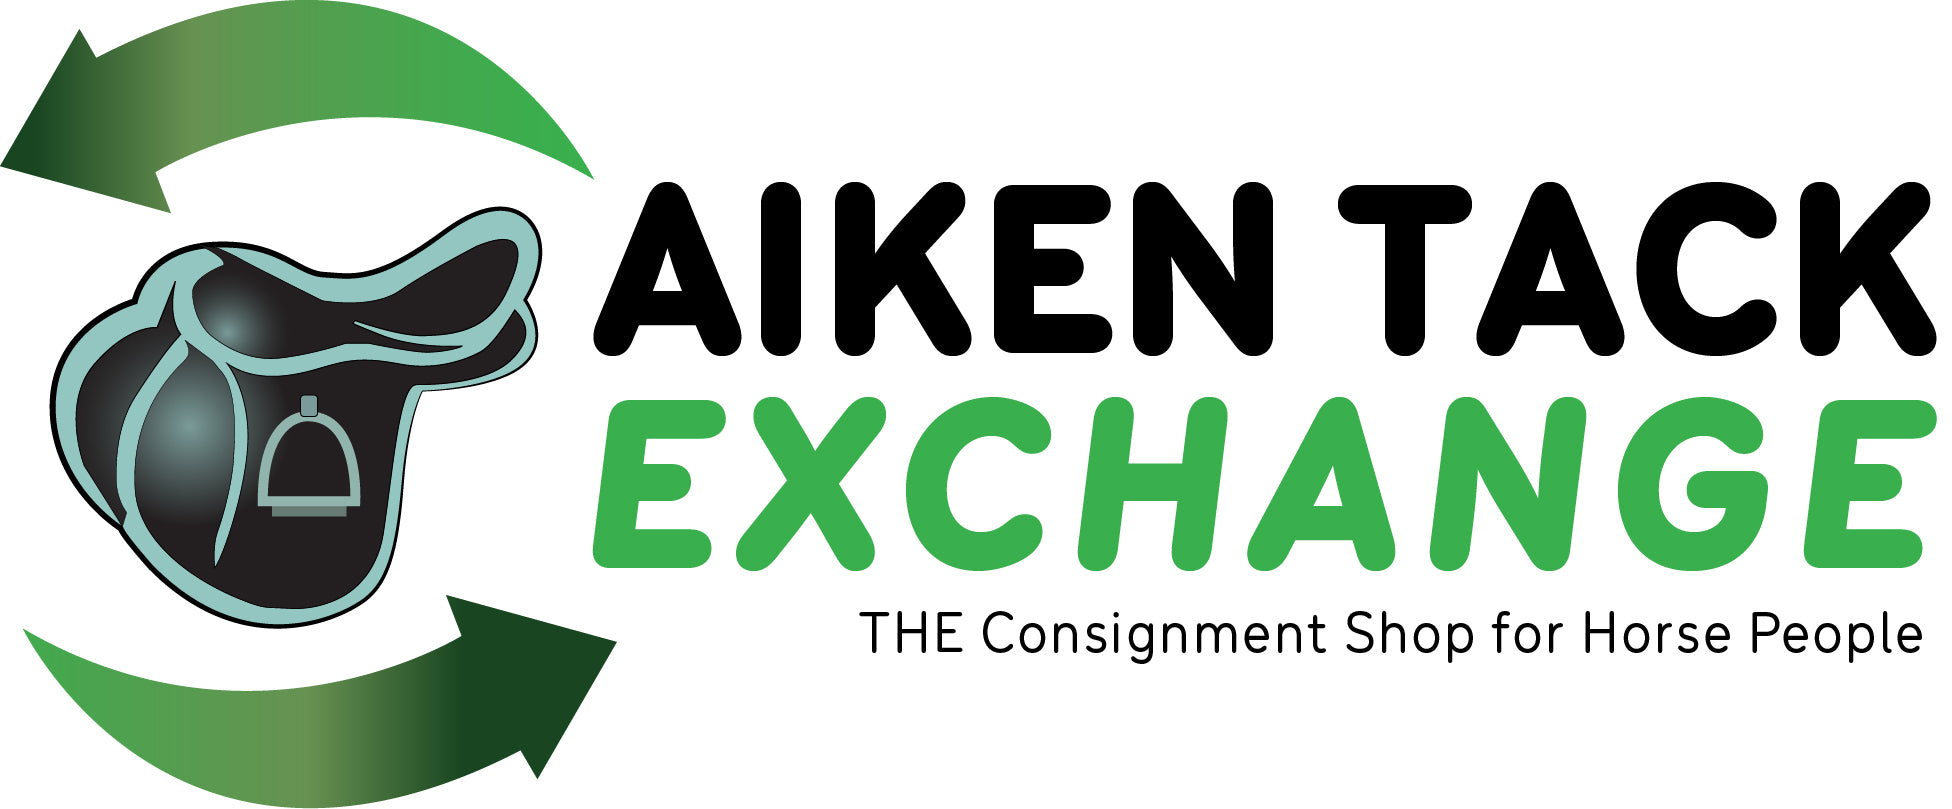 Aiken Tack Exchange: THE Consignment Store For Horse People